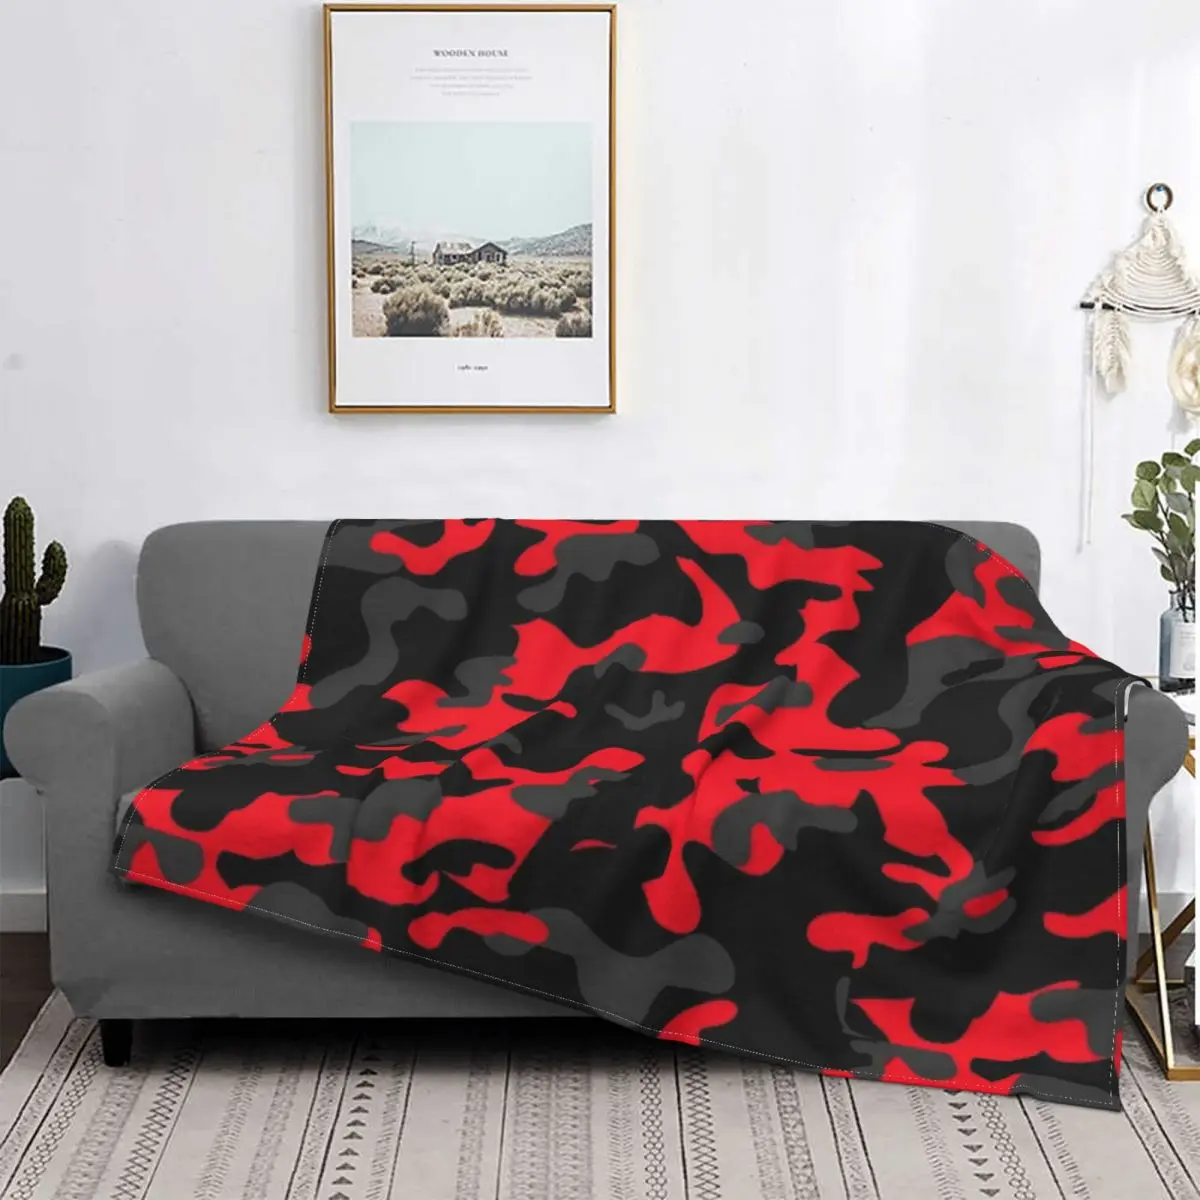 

Red Camo Blanket Camouflage Military Warm Bedspread Plush Ultra Soft Cover Flannel Quilt Bedding Sofa Couch Fluffy Gift